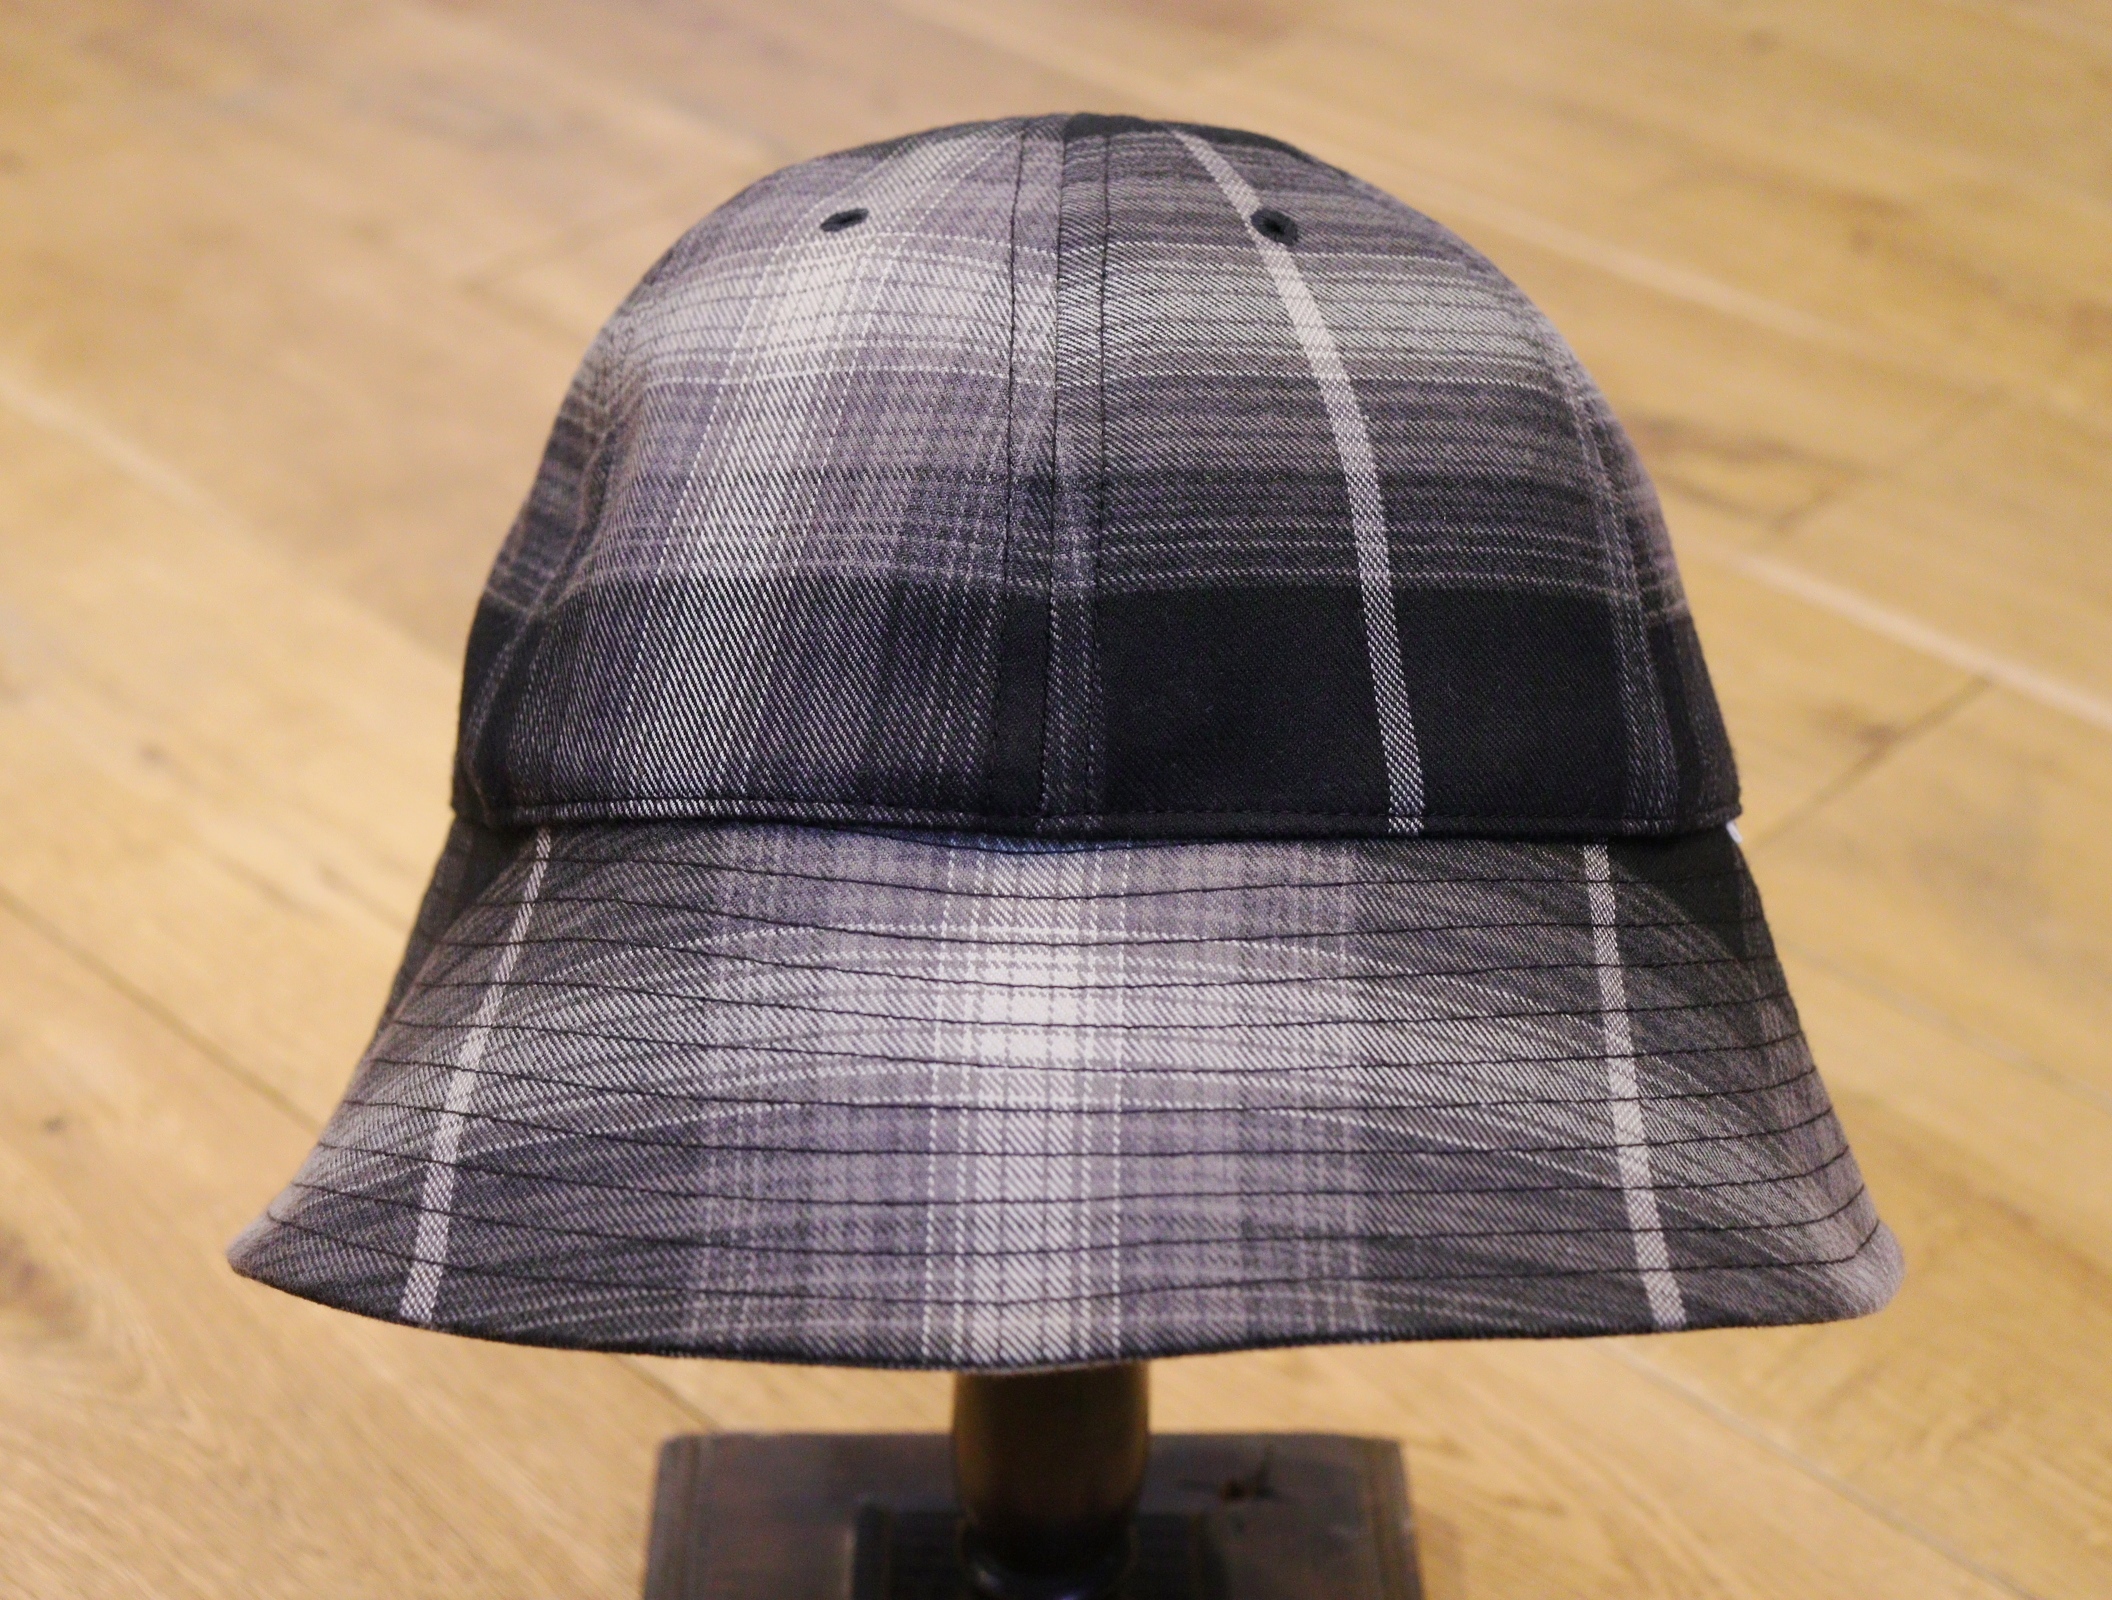 COOTIE 「R/C Ombre Check Ball Hat」 オンブレチェック ボウルハット